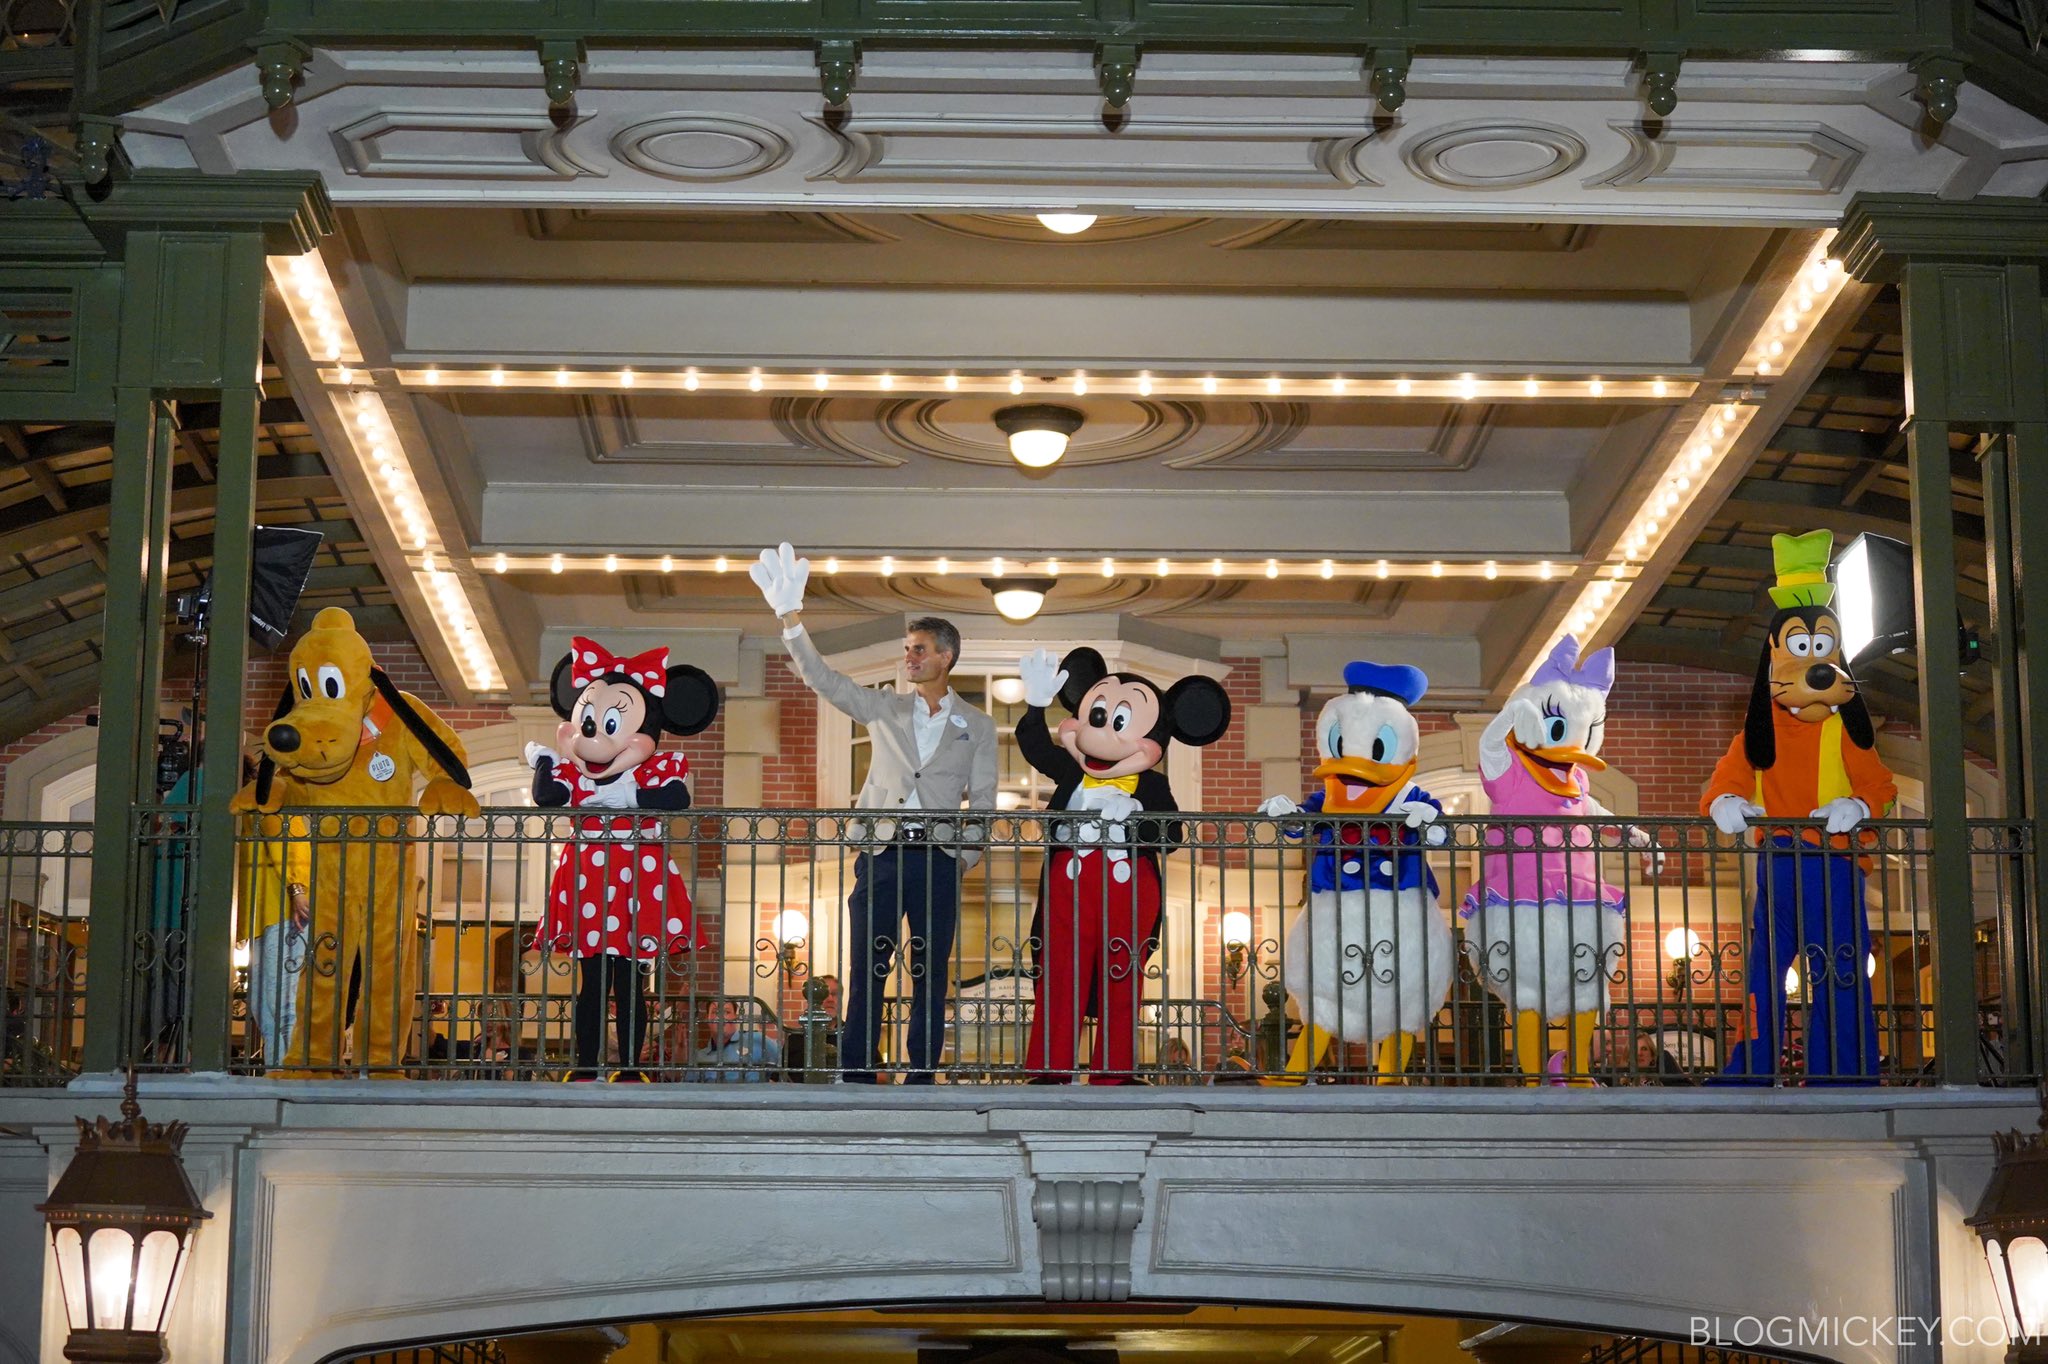 BlogMickey.com on X: Here's the scene from Main Street USA tonight as Walt  Disney World President Josh D'Amaro is joined by beloved Disney characters  to say goodbye to guests (biggest cheers for